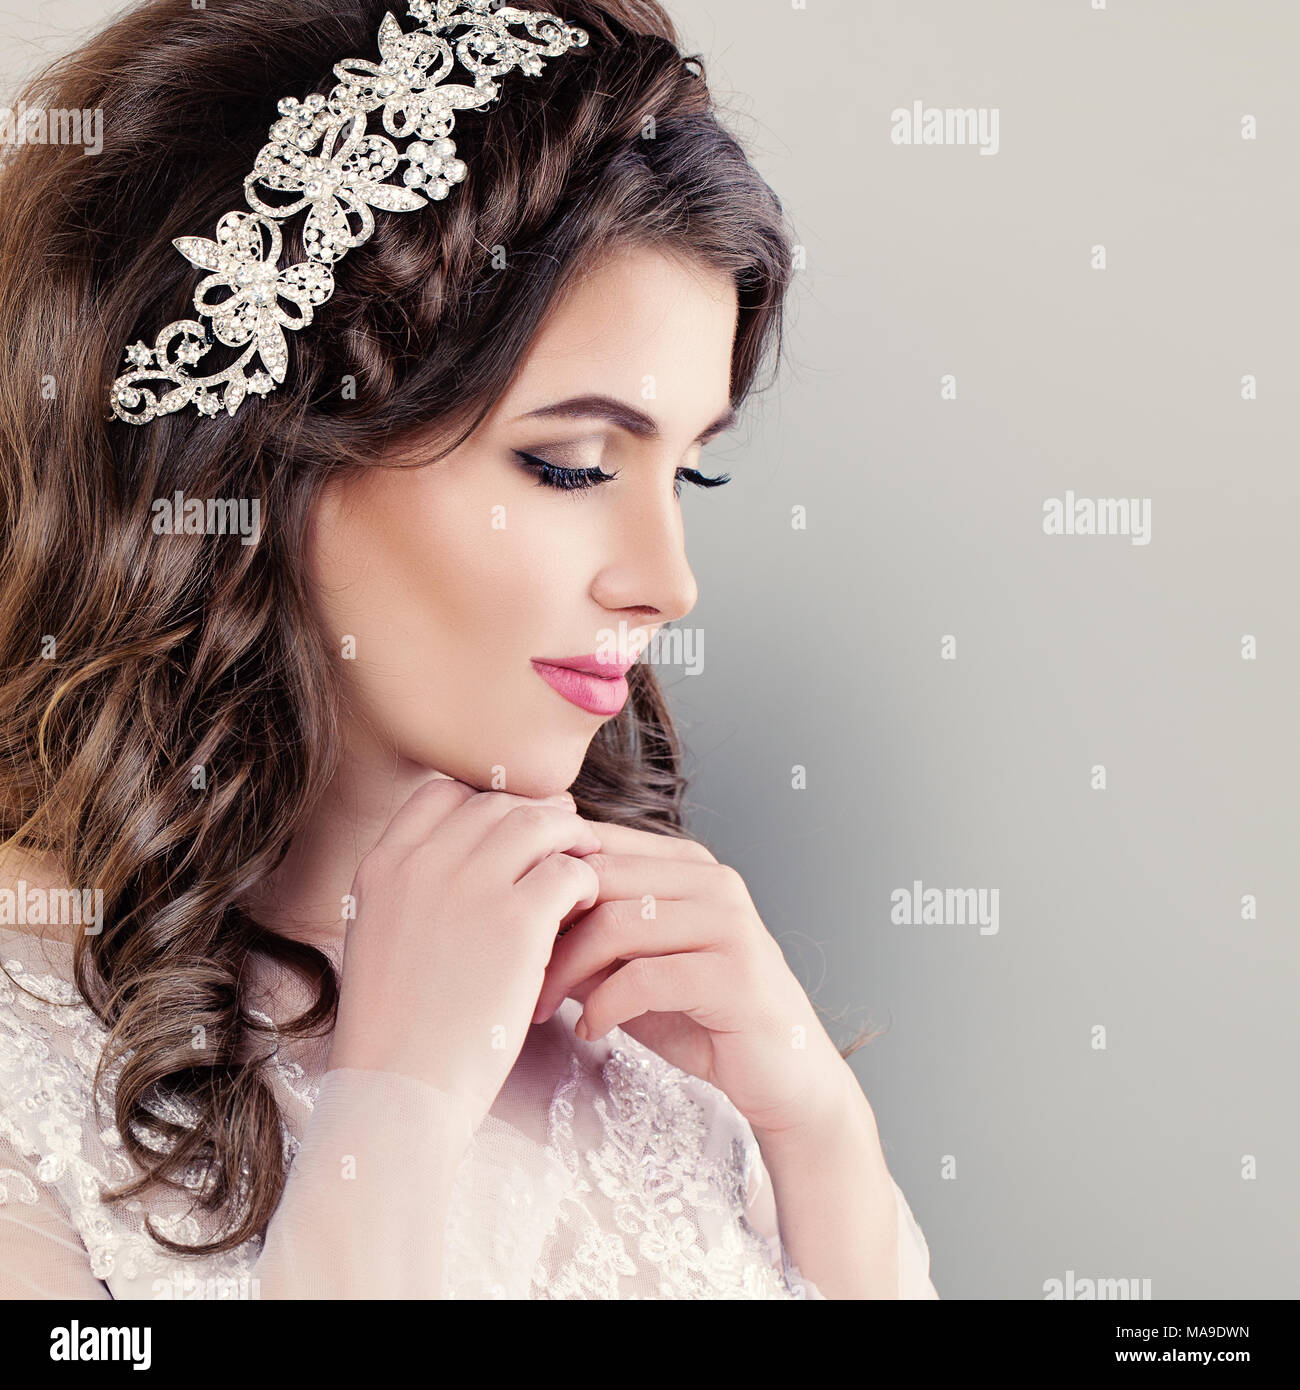 Beautiful Young Bride. Stylish Woman Fiancee with Bridal Hairstyle, Event Makeup and Jewelry Stock Photo